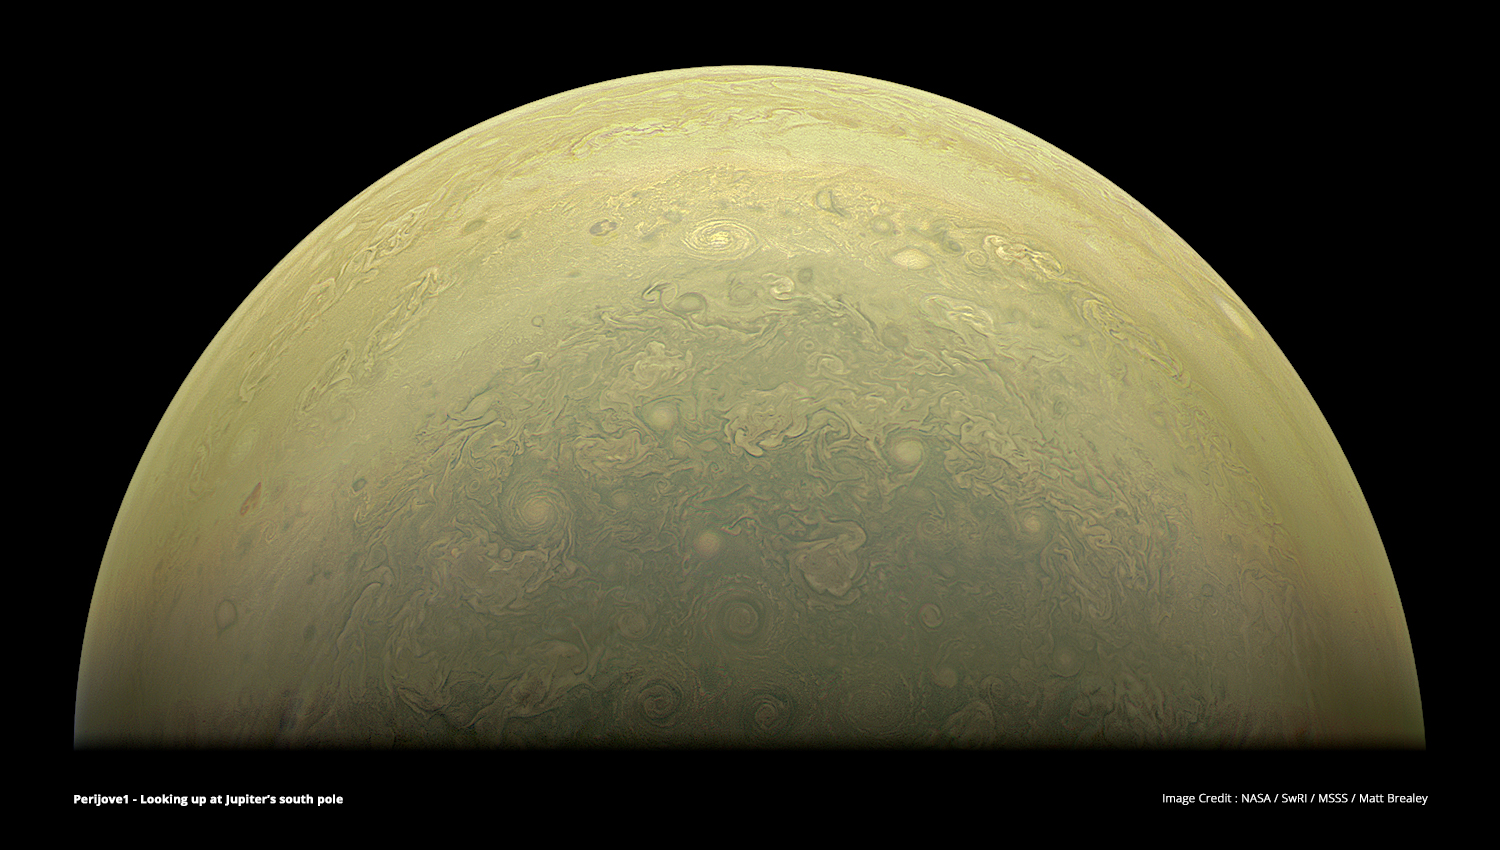 Citizen Scientists Jump Aboard NASA's Jupiter Mission to Create Amazing Images